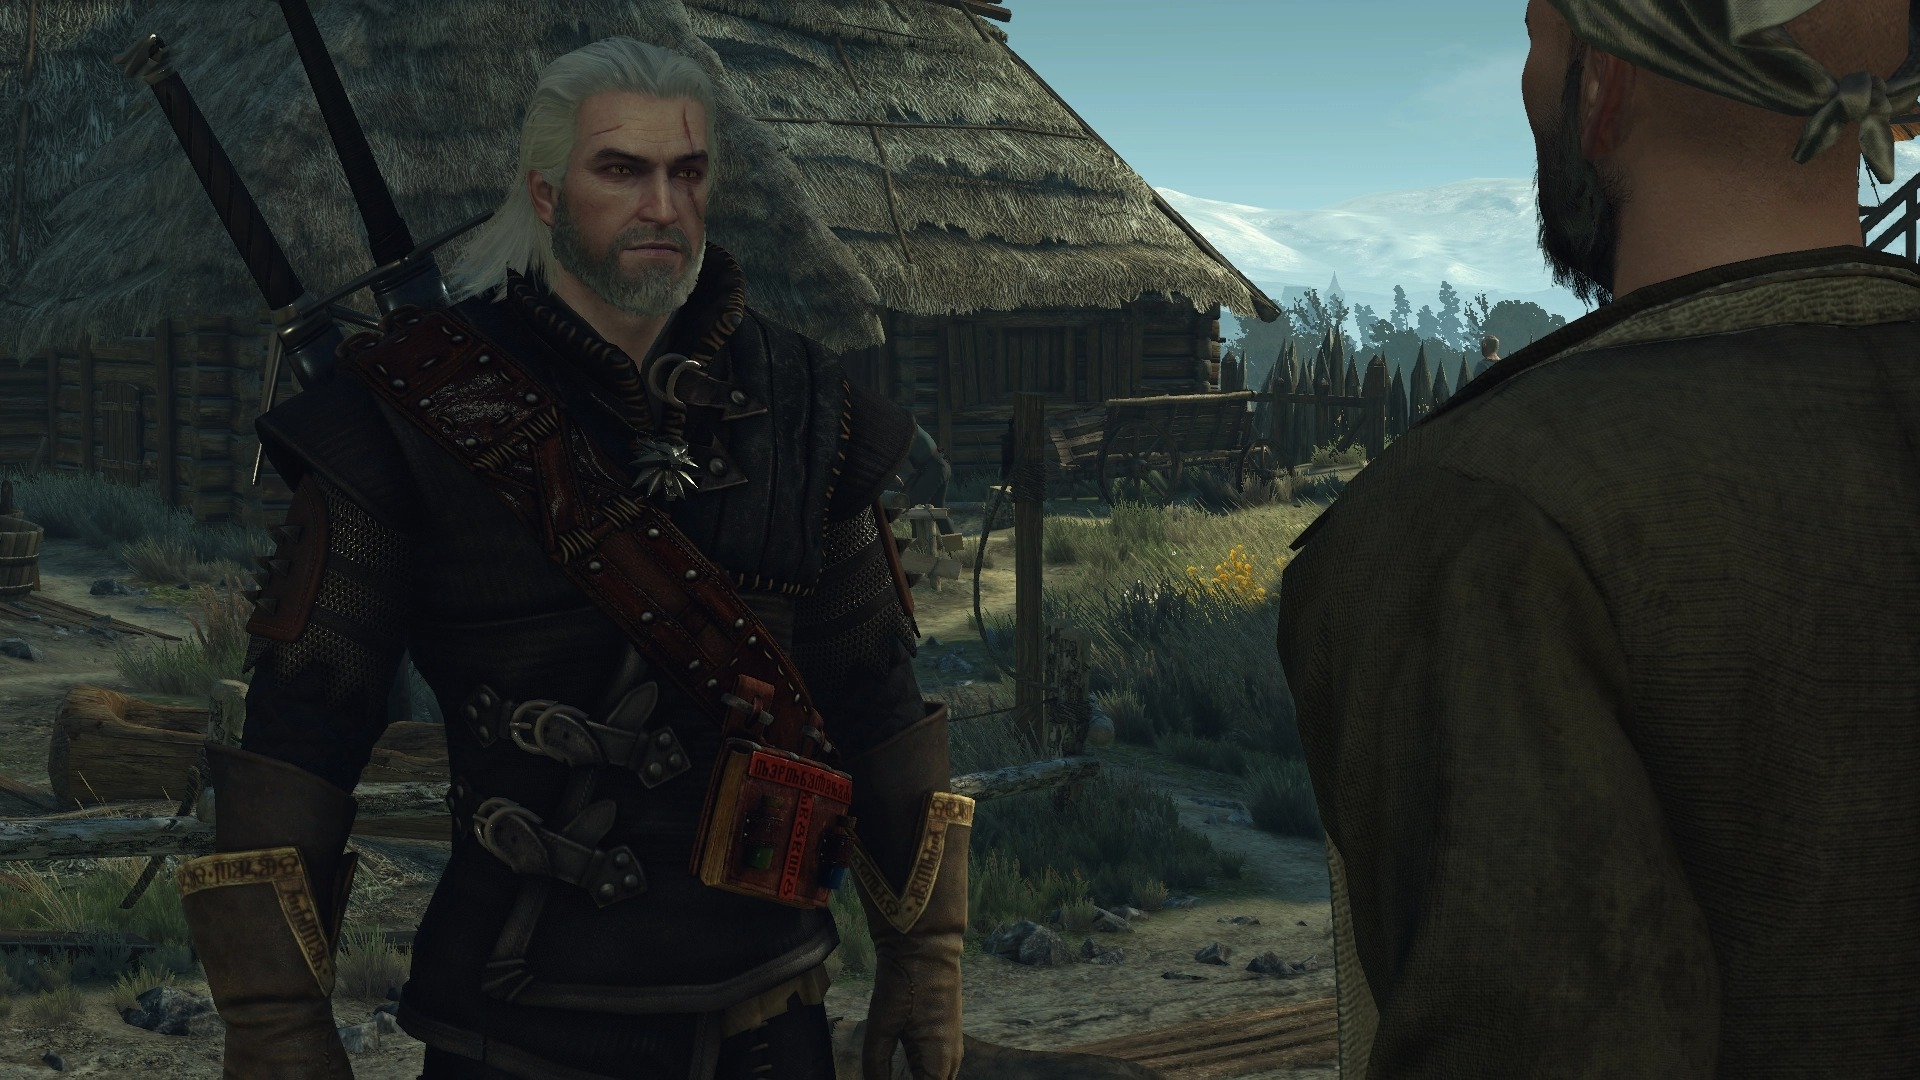 The witcher 3 best witcher armor фото 113